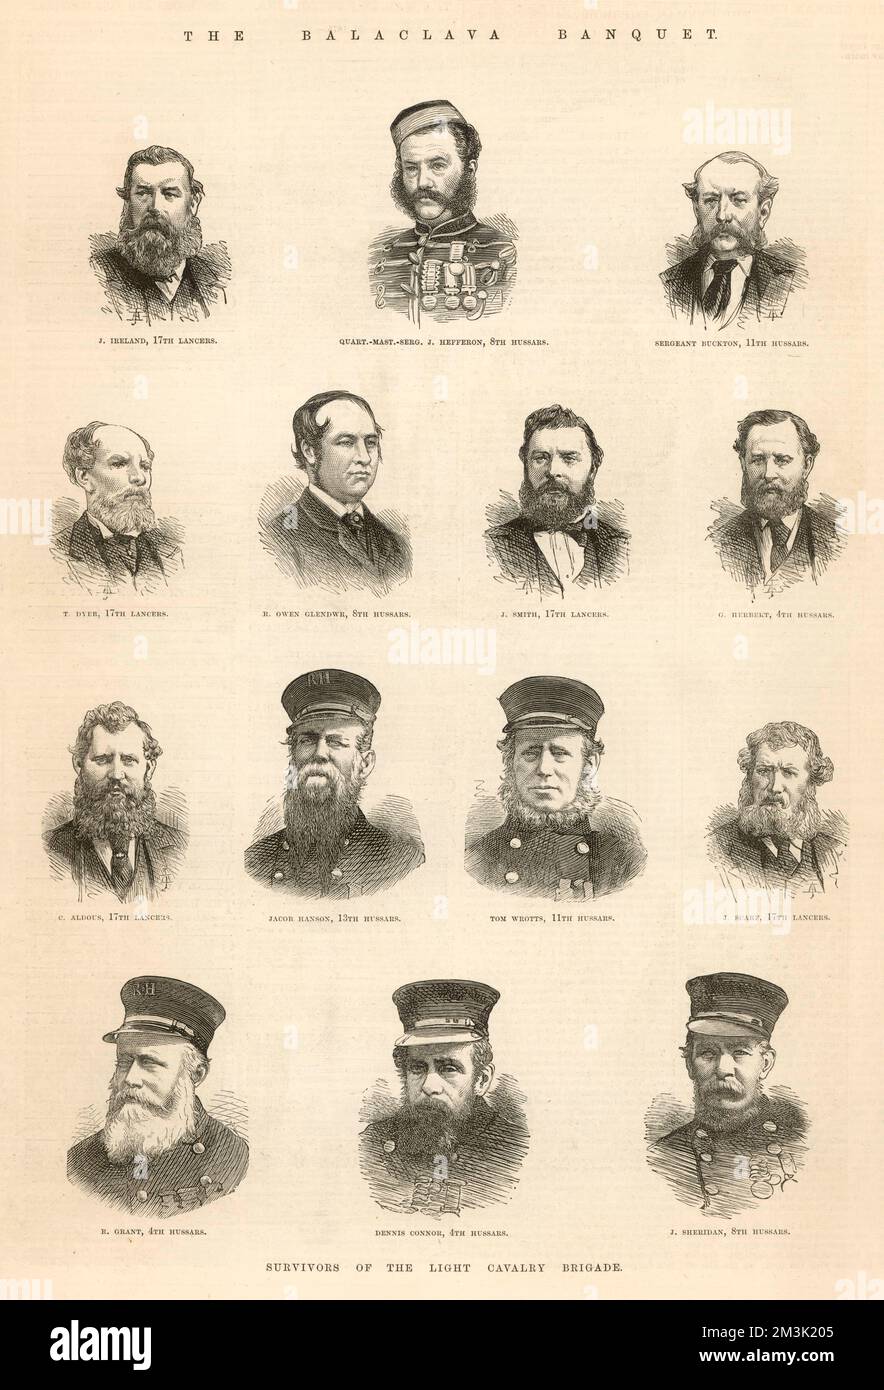 Series of engraved portraits showing the surviving British participants of the Charge of the Light Brigade of the Battle of Balaclave, Crimean War, pictured in 1875.    The men shown are: J Ireland, 17th Lancers; Quarter-Master Sergeant Jefferson, 8th Hussars; Sergeant Buckton, 11th Hussars; T Dyer, 17th Lancers; R Owen Glendwr, 8th Hussars; J Smith, 17th Lancers; JH Herbert, 4th Hussars; C Aldous, 17th Lancers; Jacob Hanson, 13th Hussars; Tom Wrotts, 11th Hussars; J Scarf, 17th Lancers; R Grant, 4th Hussars; Dennis Connor, 4th Hussars; J Sheridan, 8th Hussars.     Date: 1875 Stock Photo